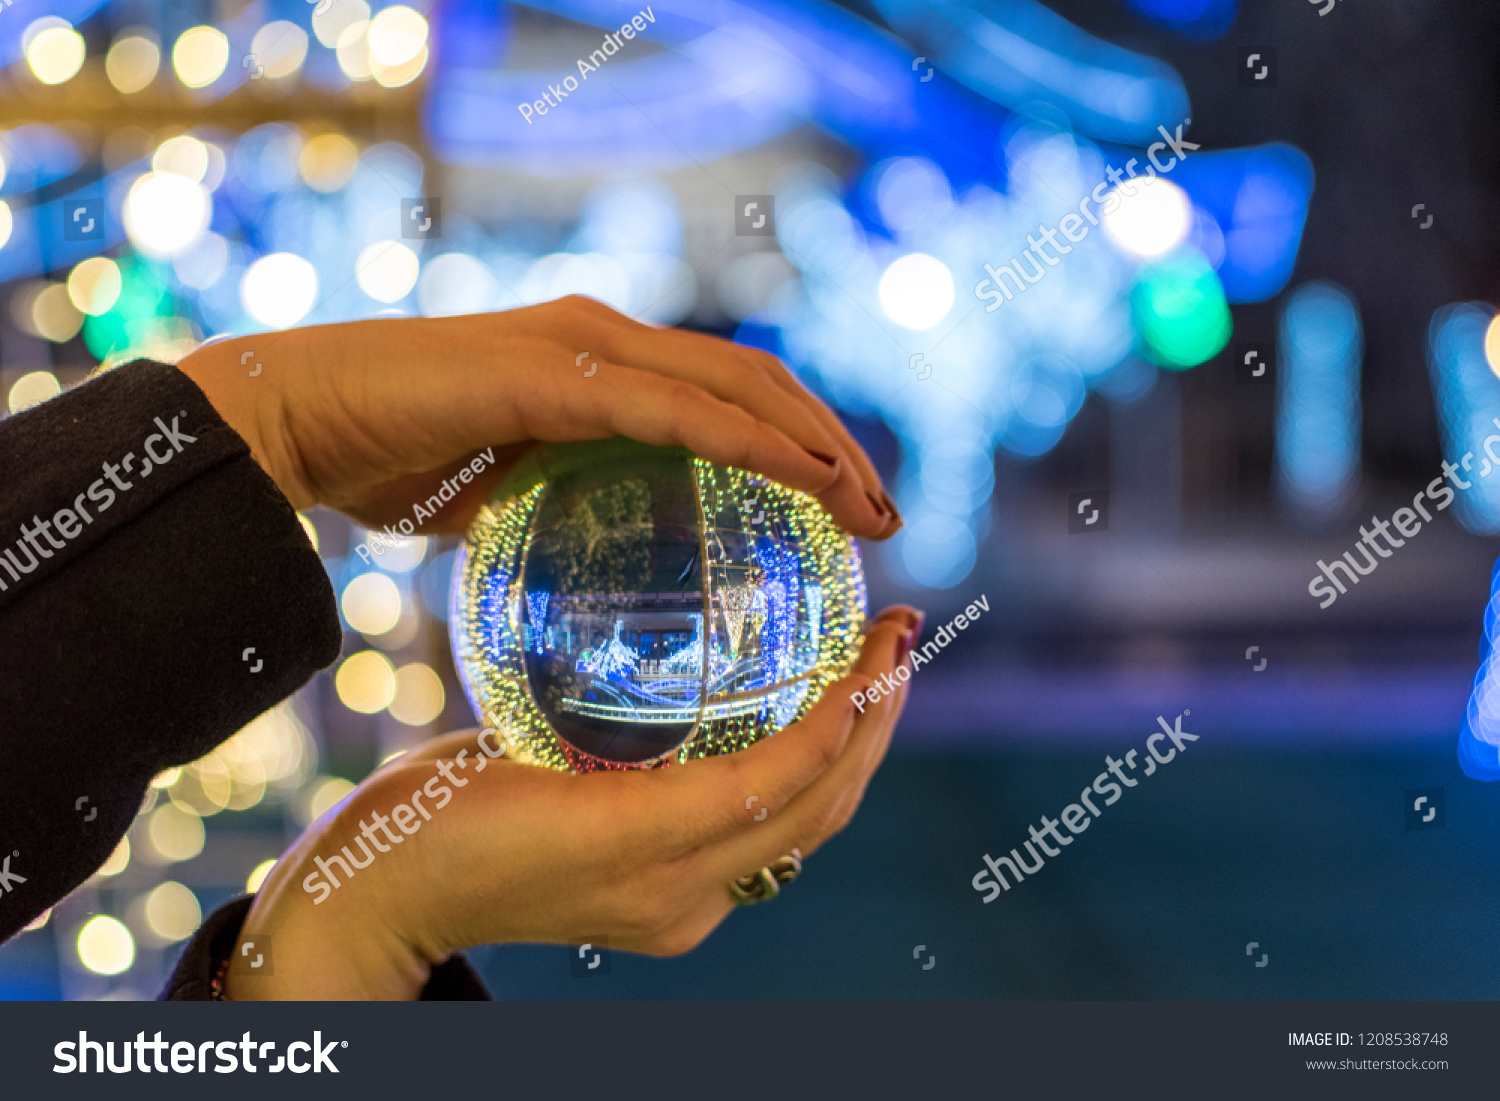 Christmas decoration caught through a glass sphere. #1208538748